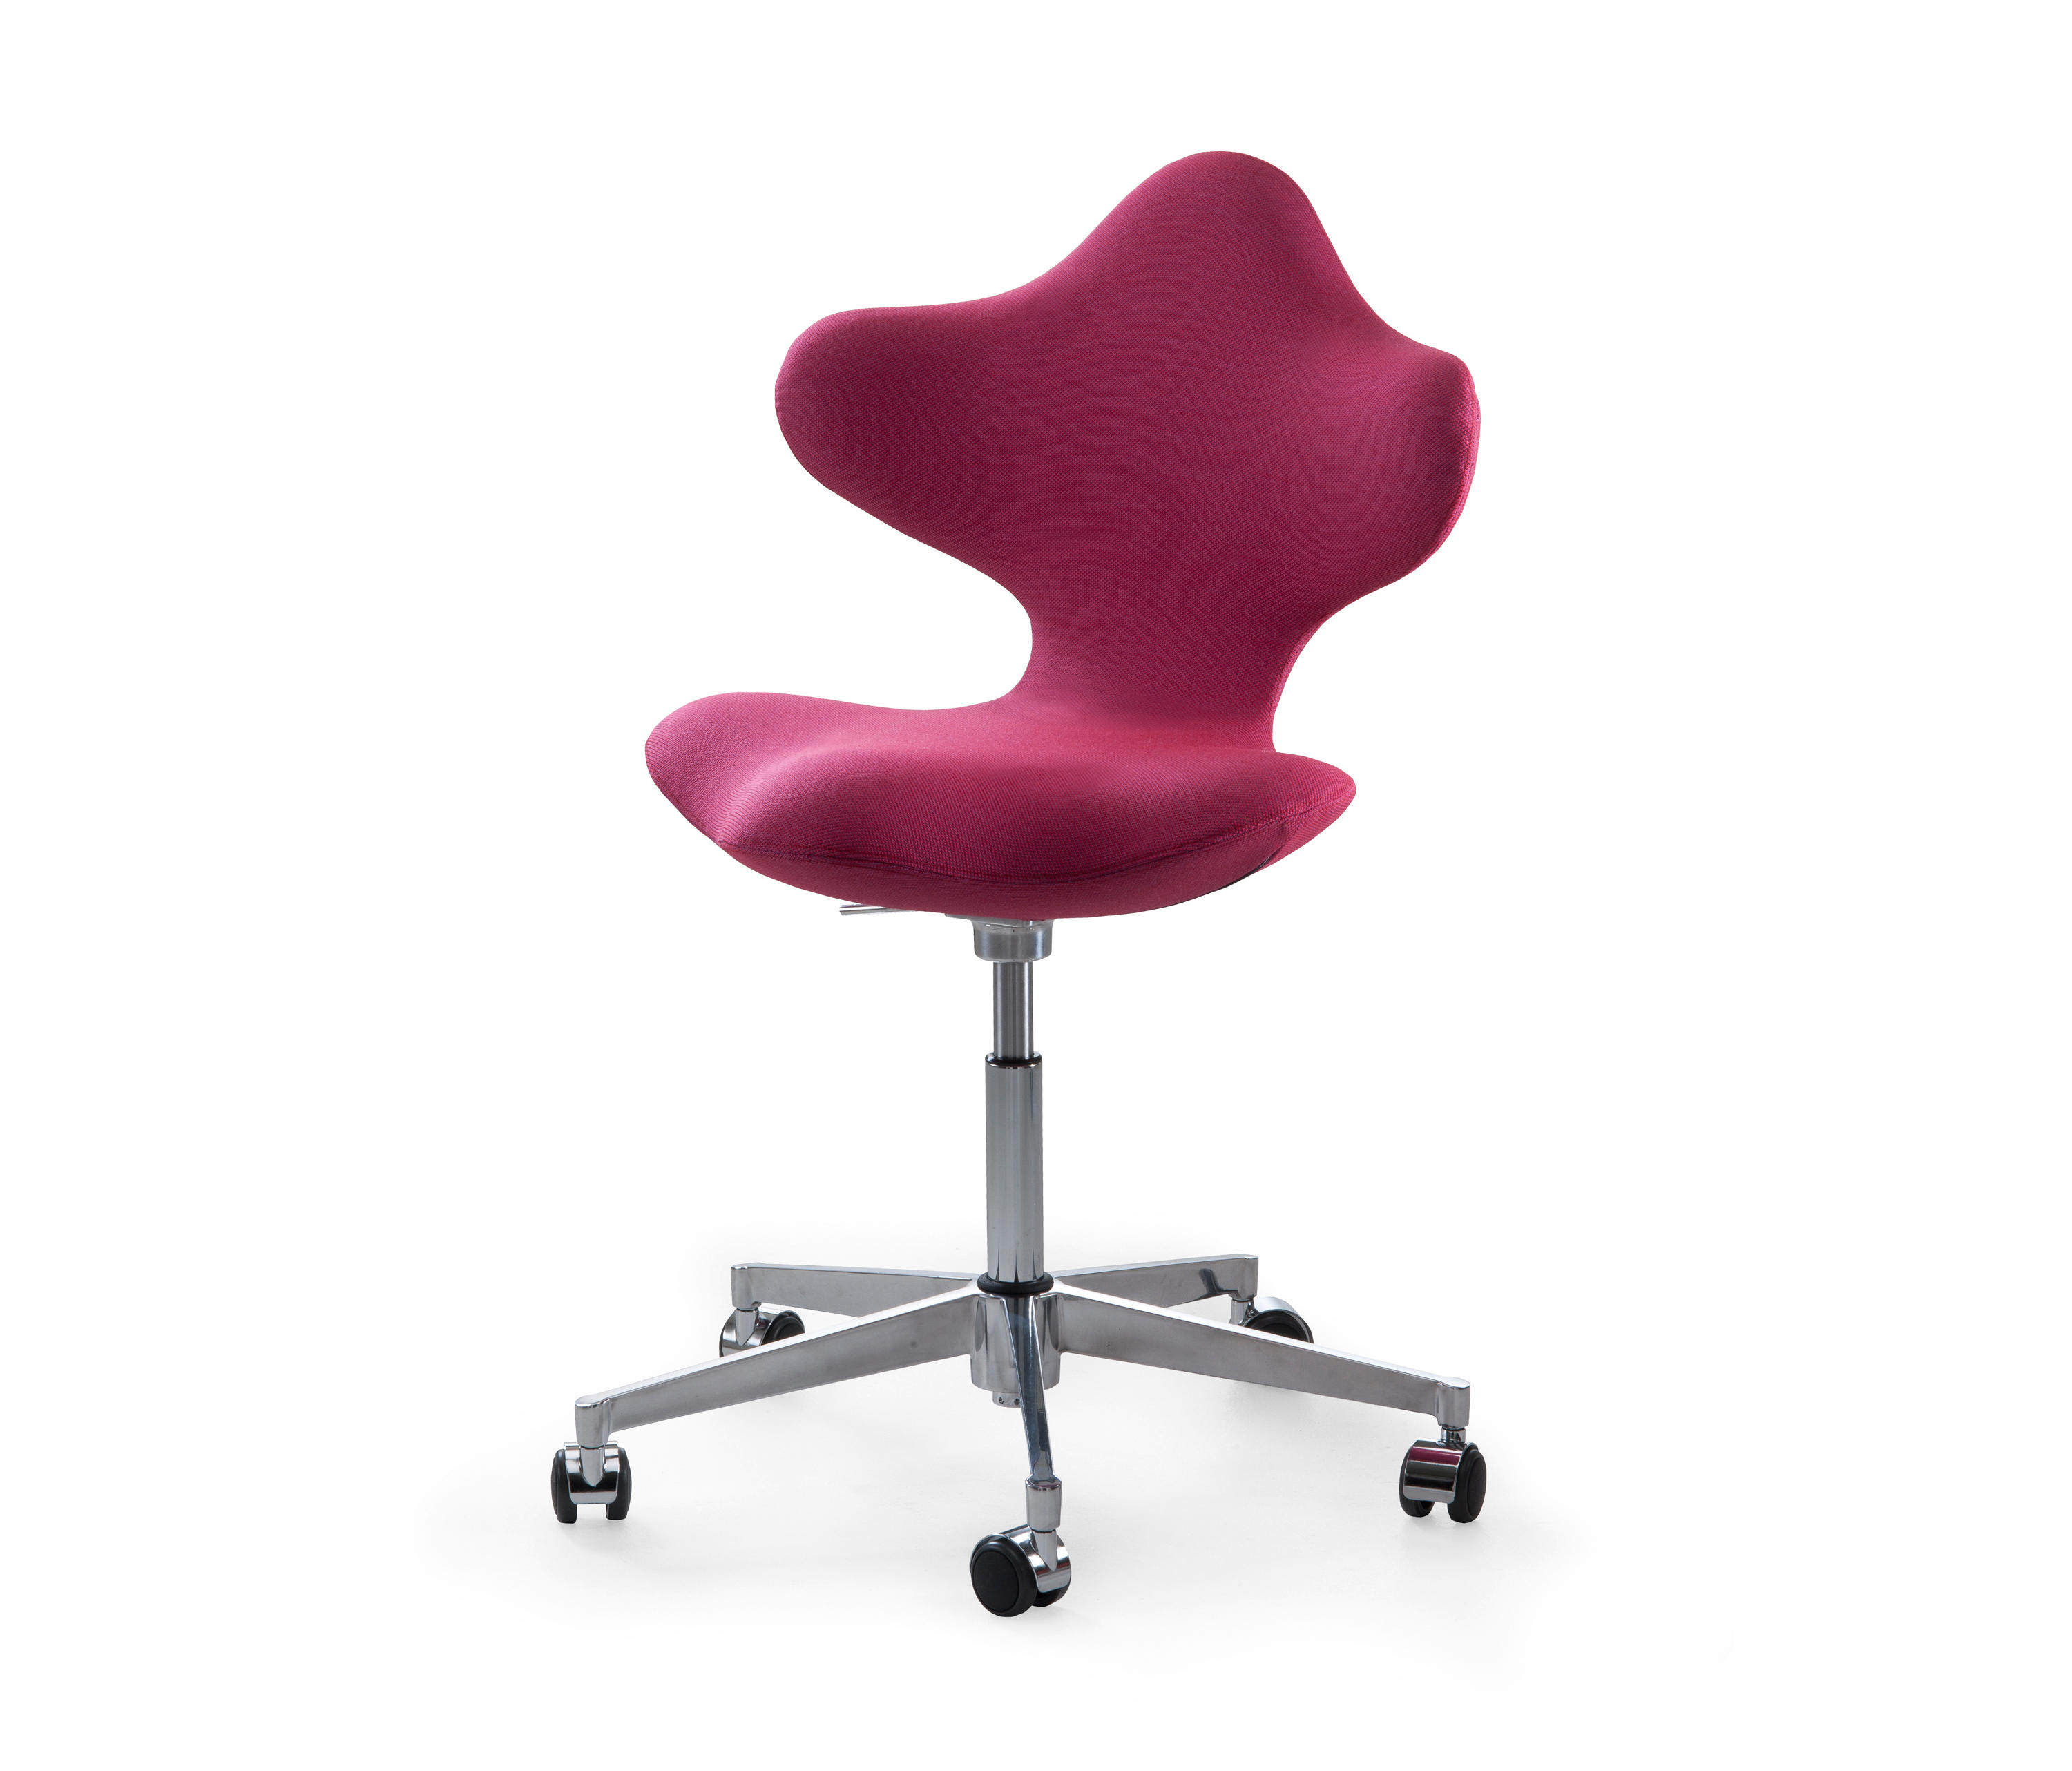 Active Seating for Active Bodies - Varier Chairs